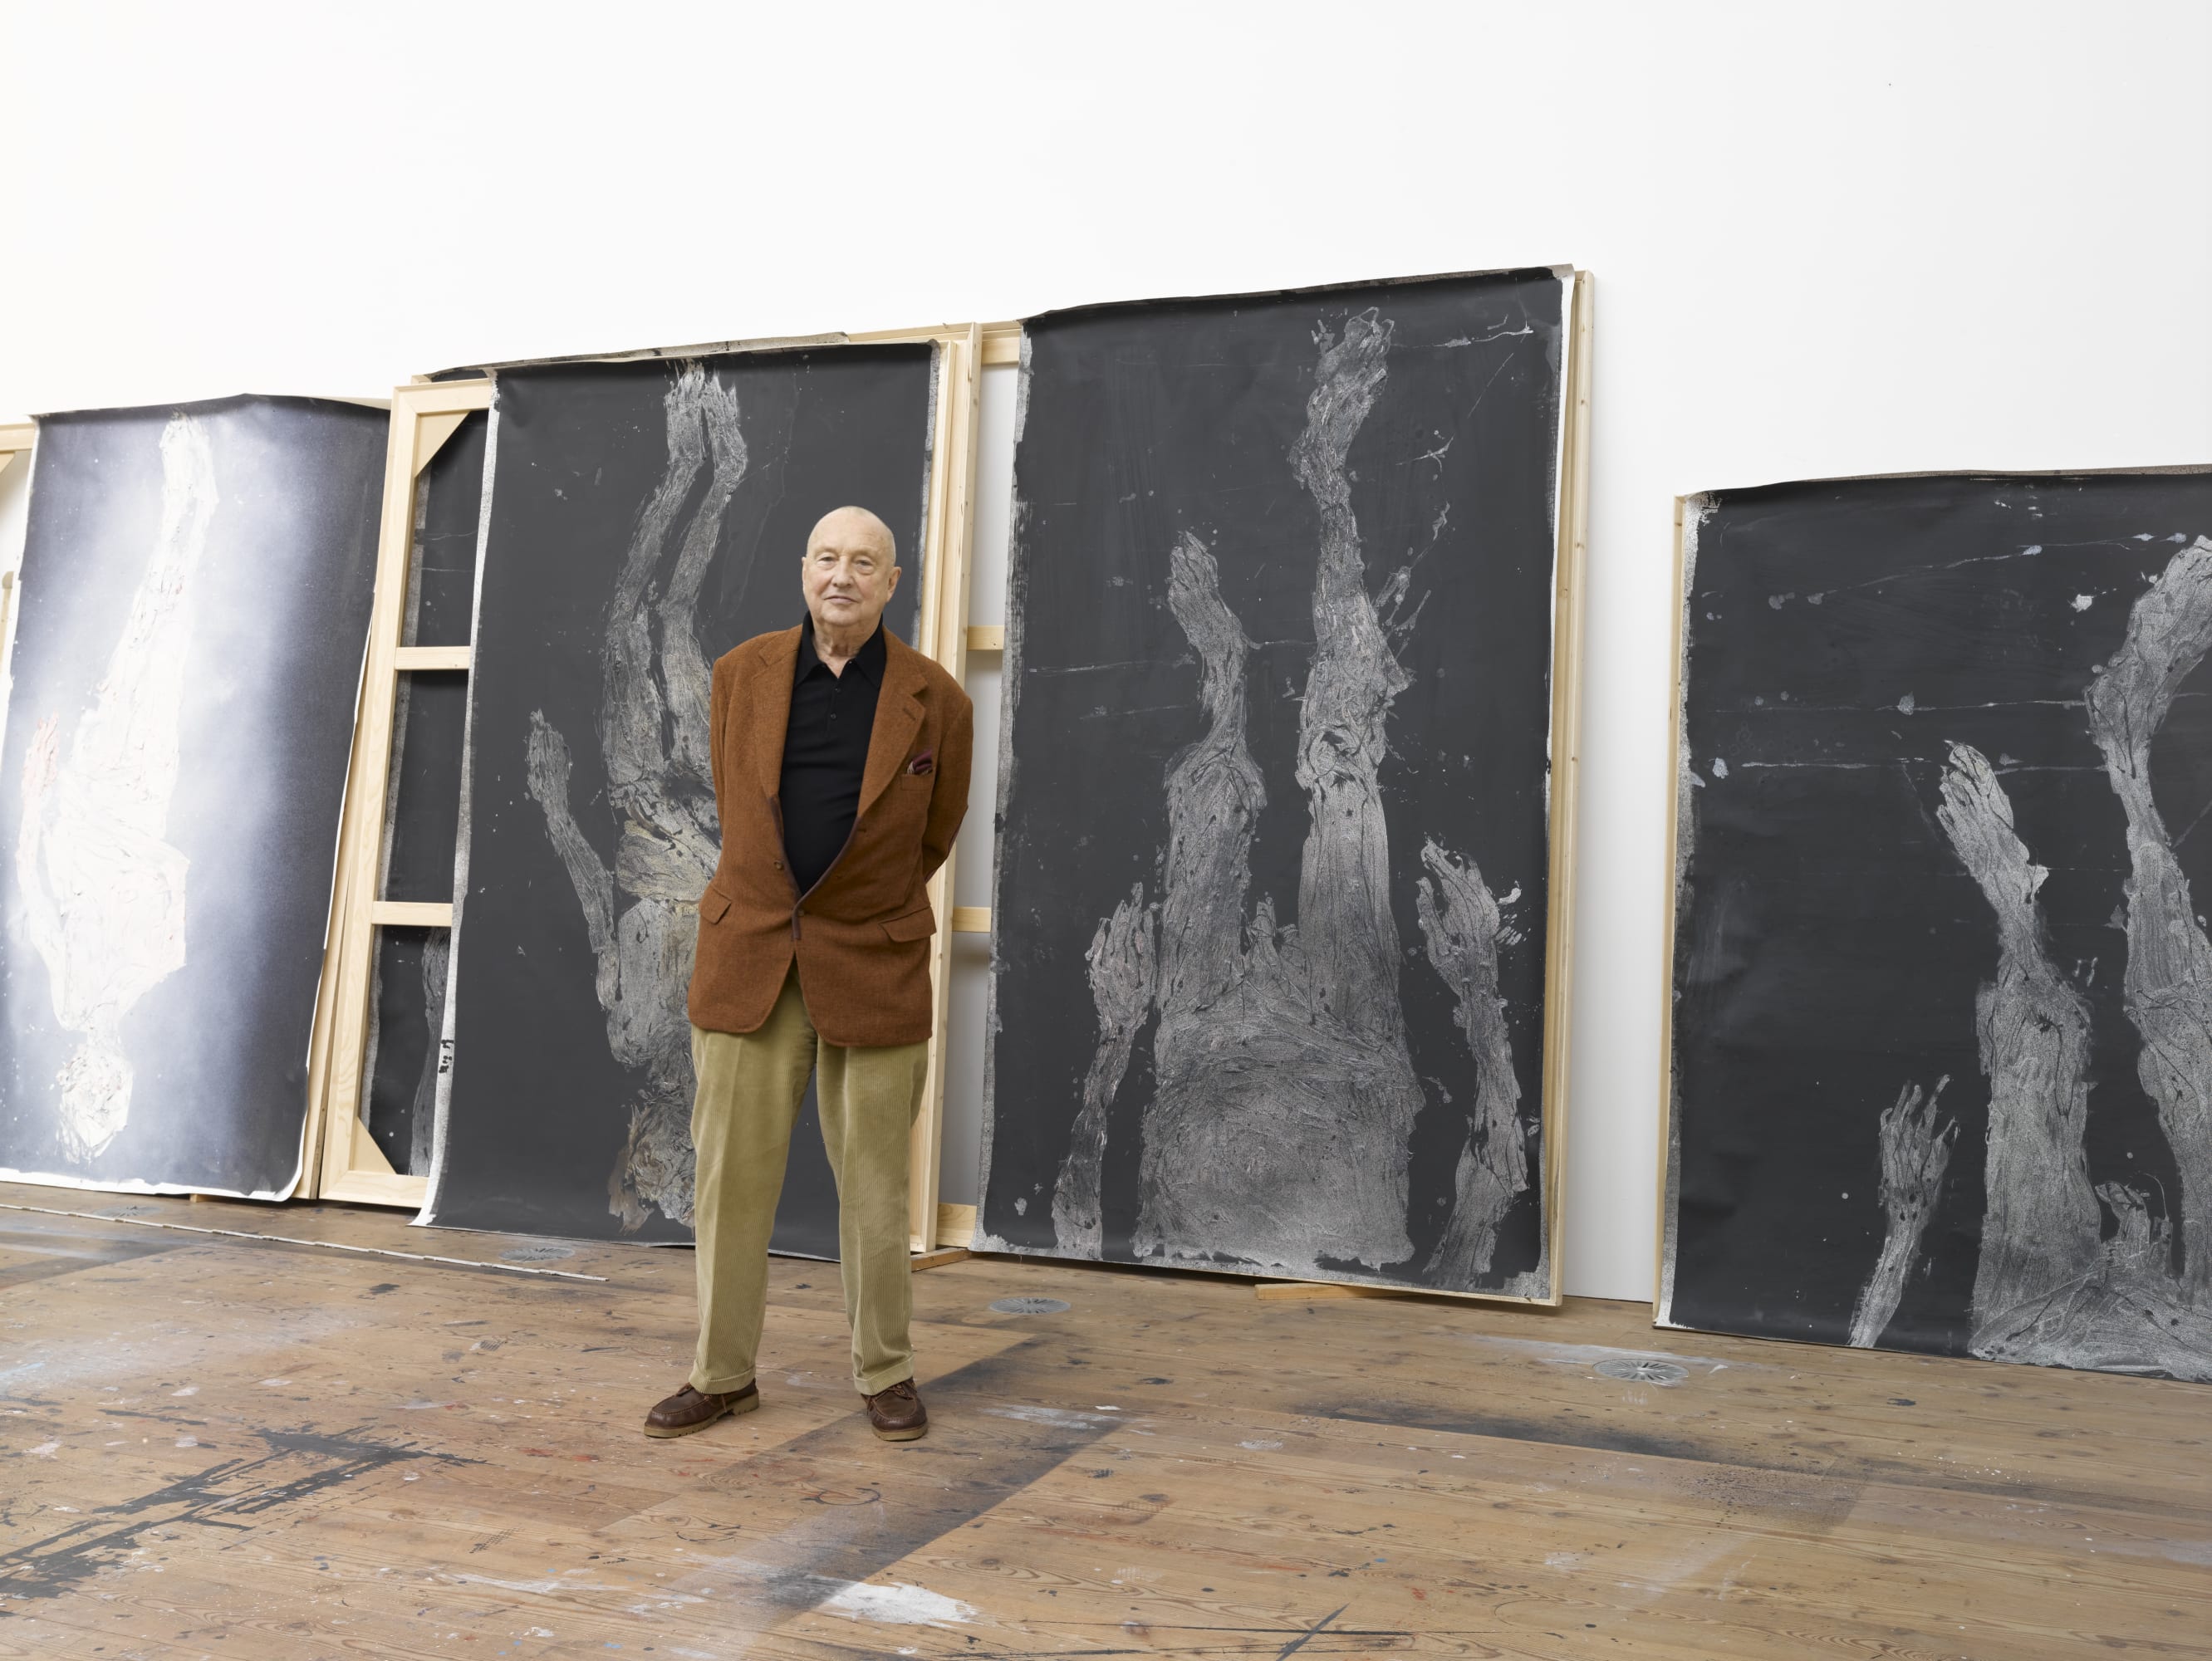 Georg Baselitz interviewed by Laure Adler In 'L'heure bleue' on France Inter